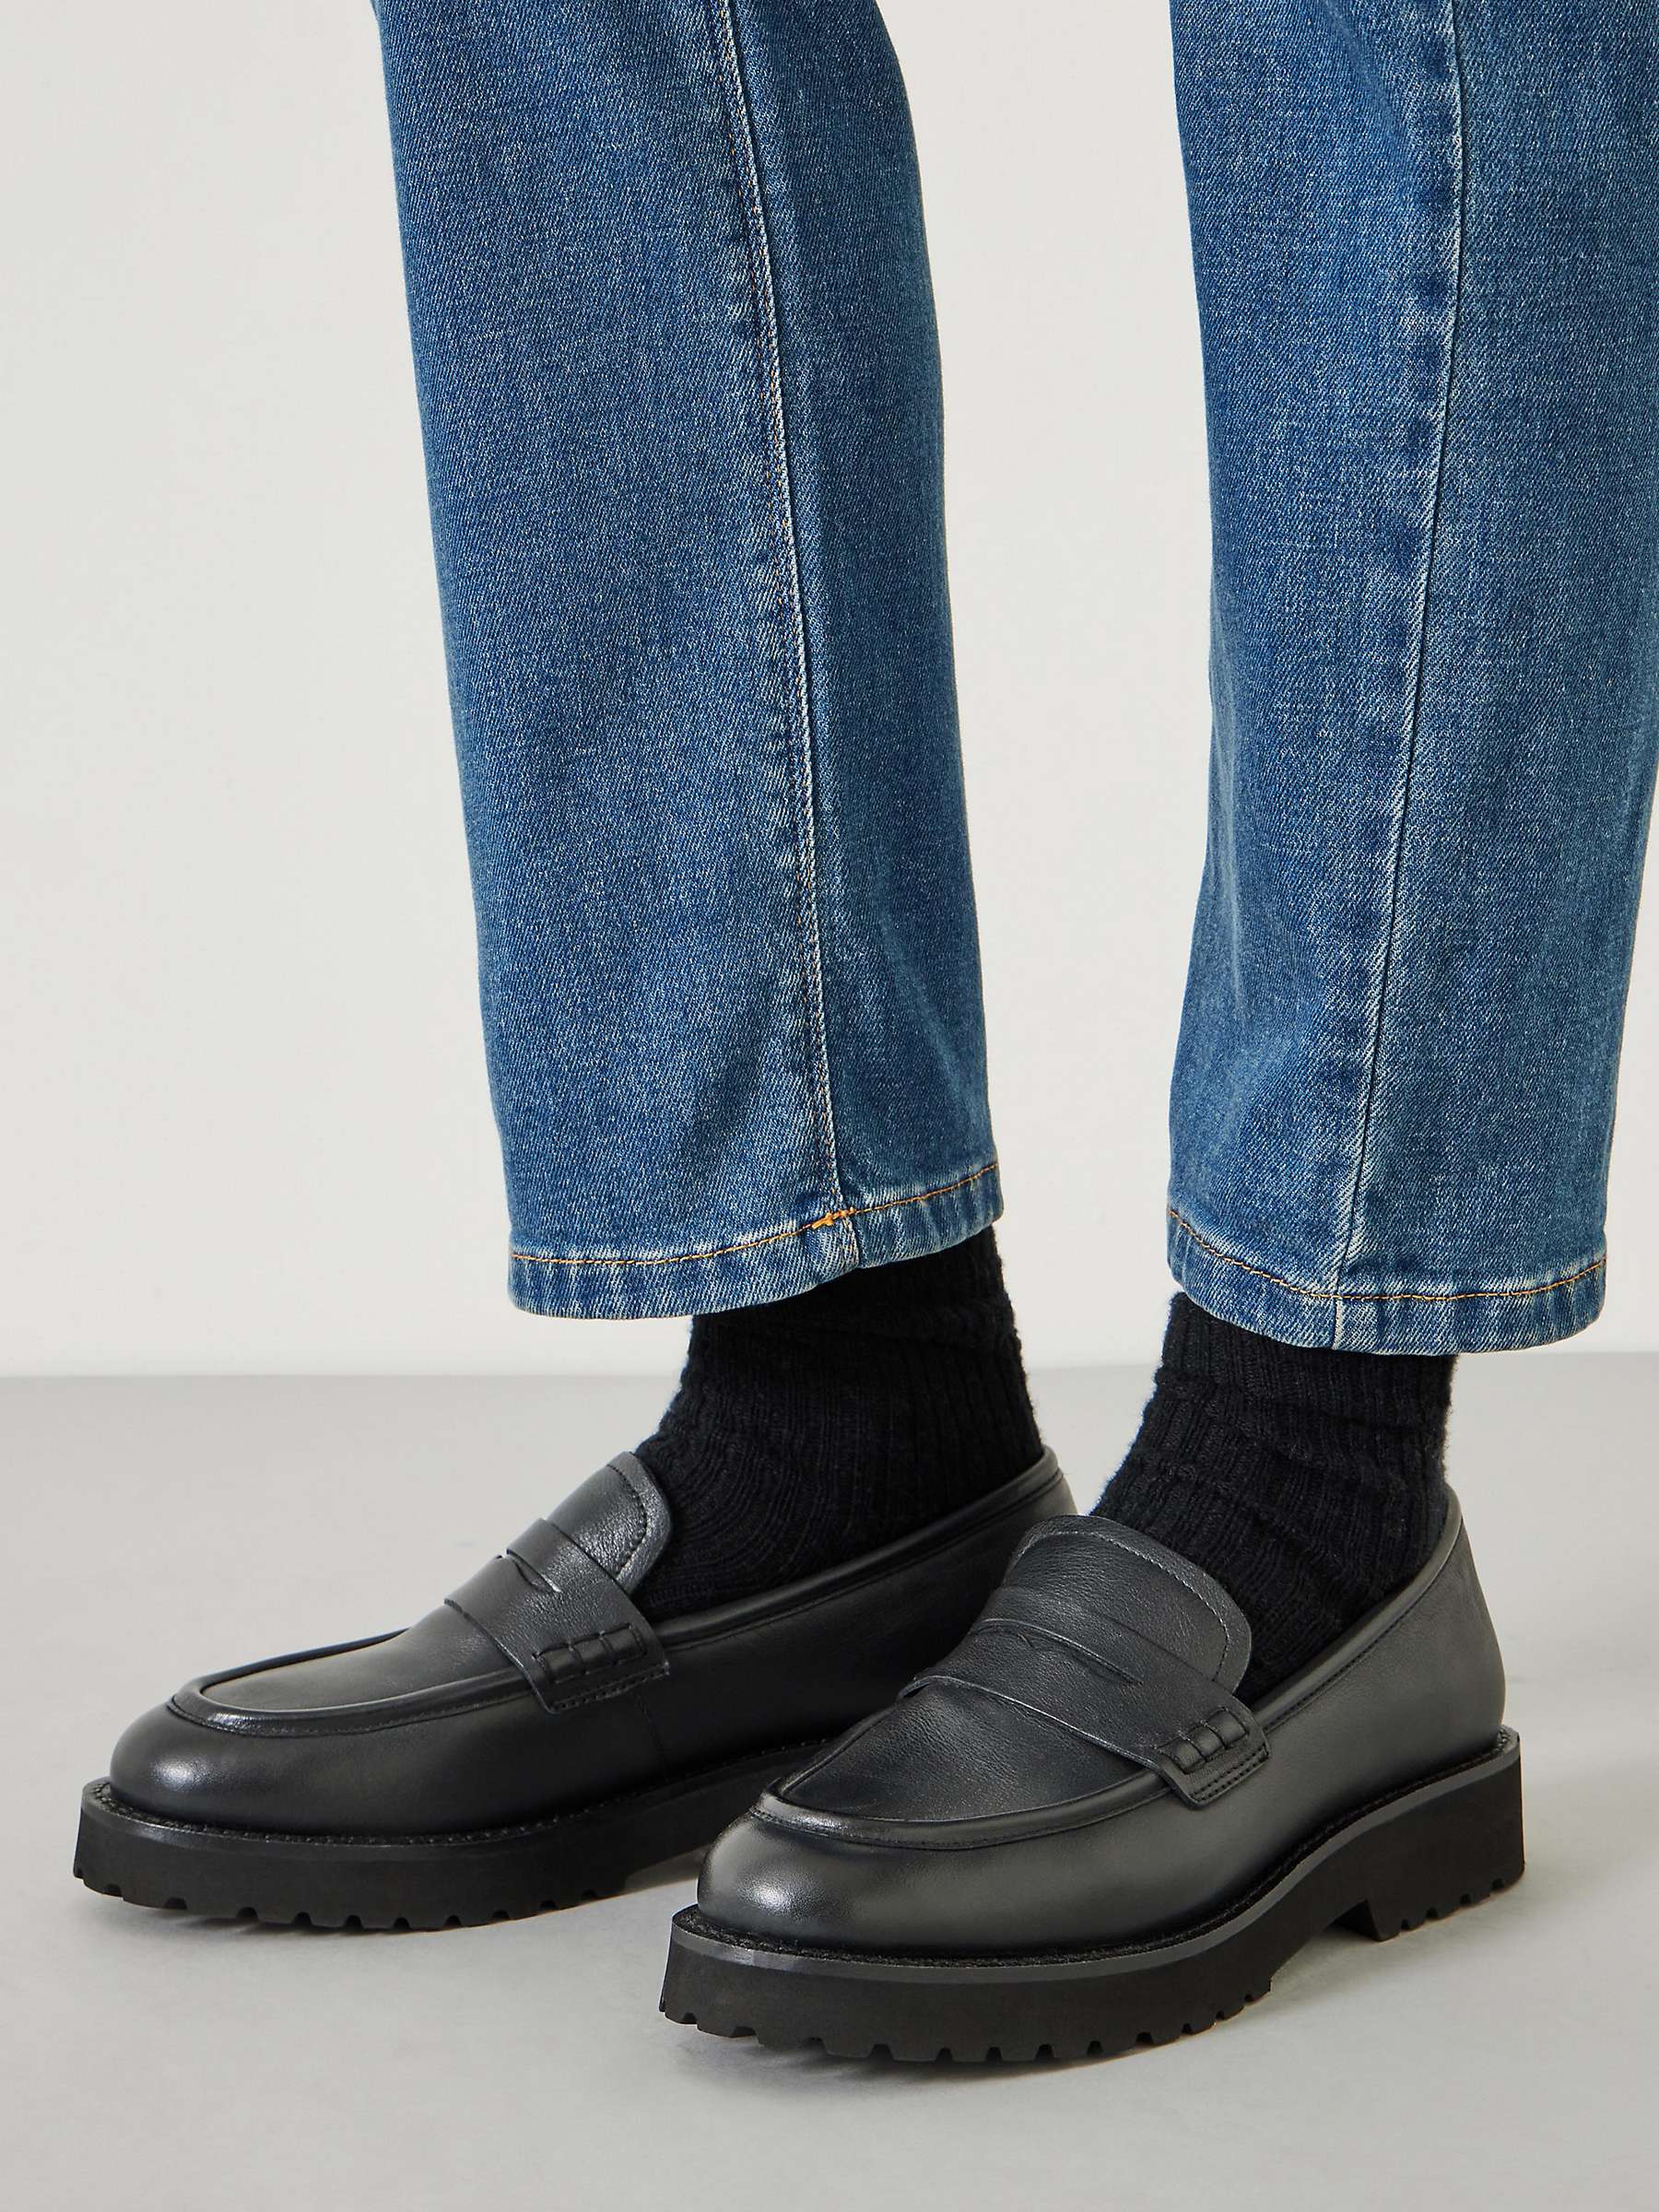 Buy HUSH Blake Cleated Leather Loafers, Black Online at johnlewis.com